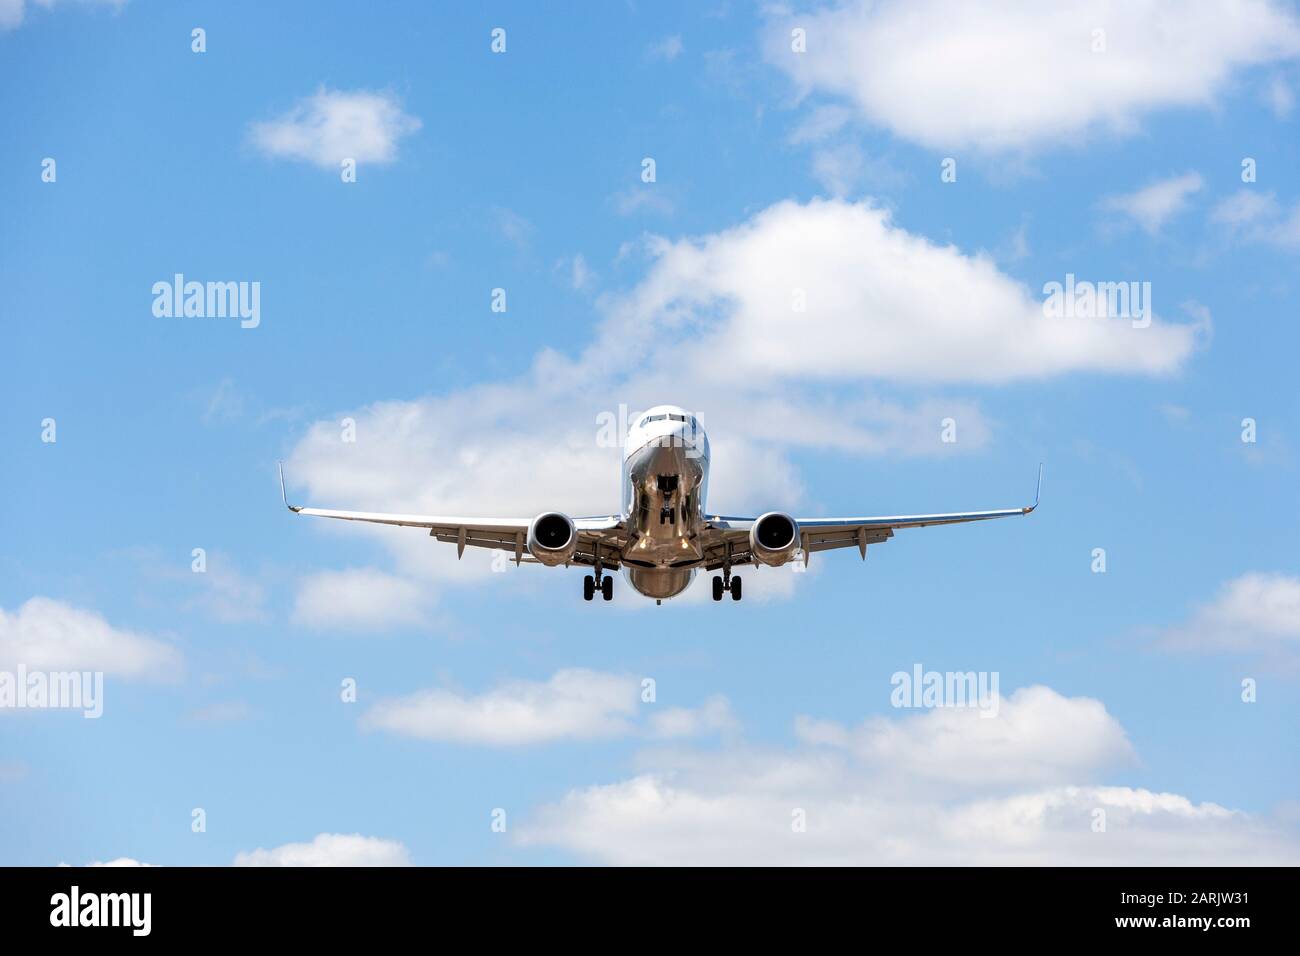 Boeing 737 landing. Front view with extended flaps, landing gear down and lights on. The wings have extended wingtips. Stock Photo